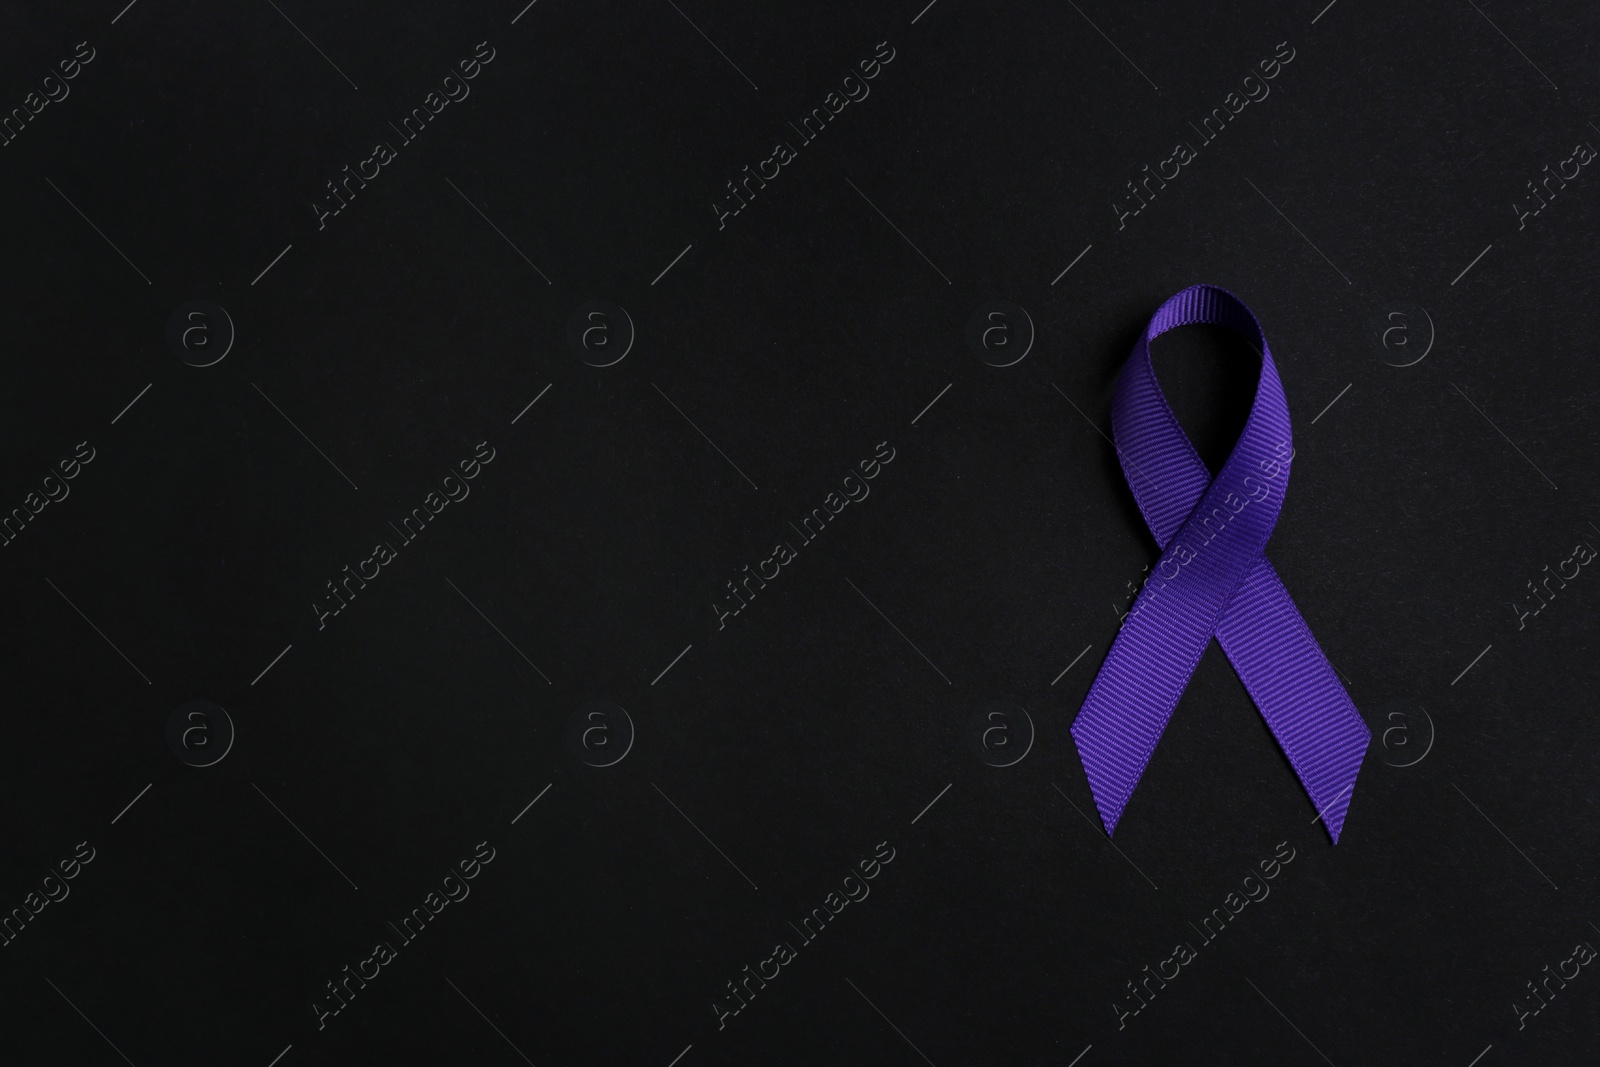 Photo of Purple awareness ribbon on black background, top view with space for text